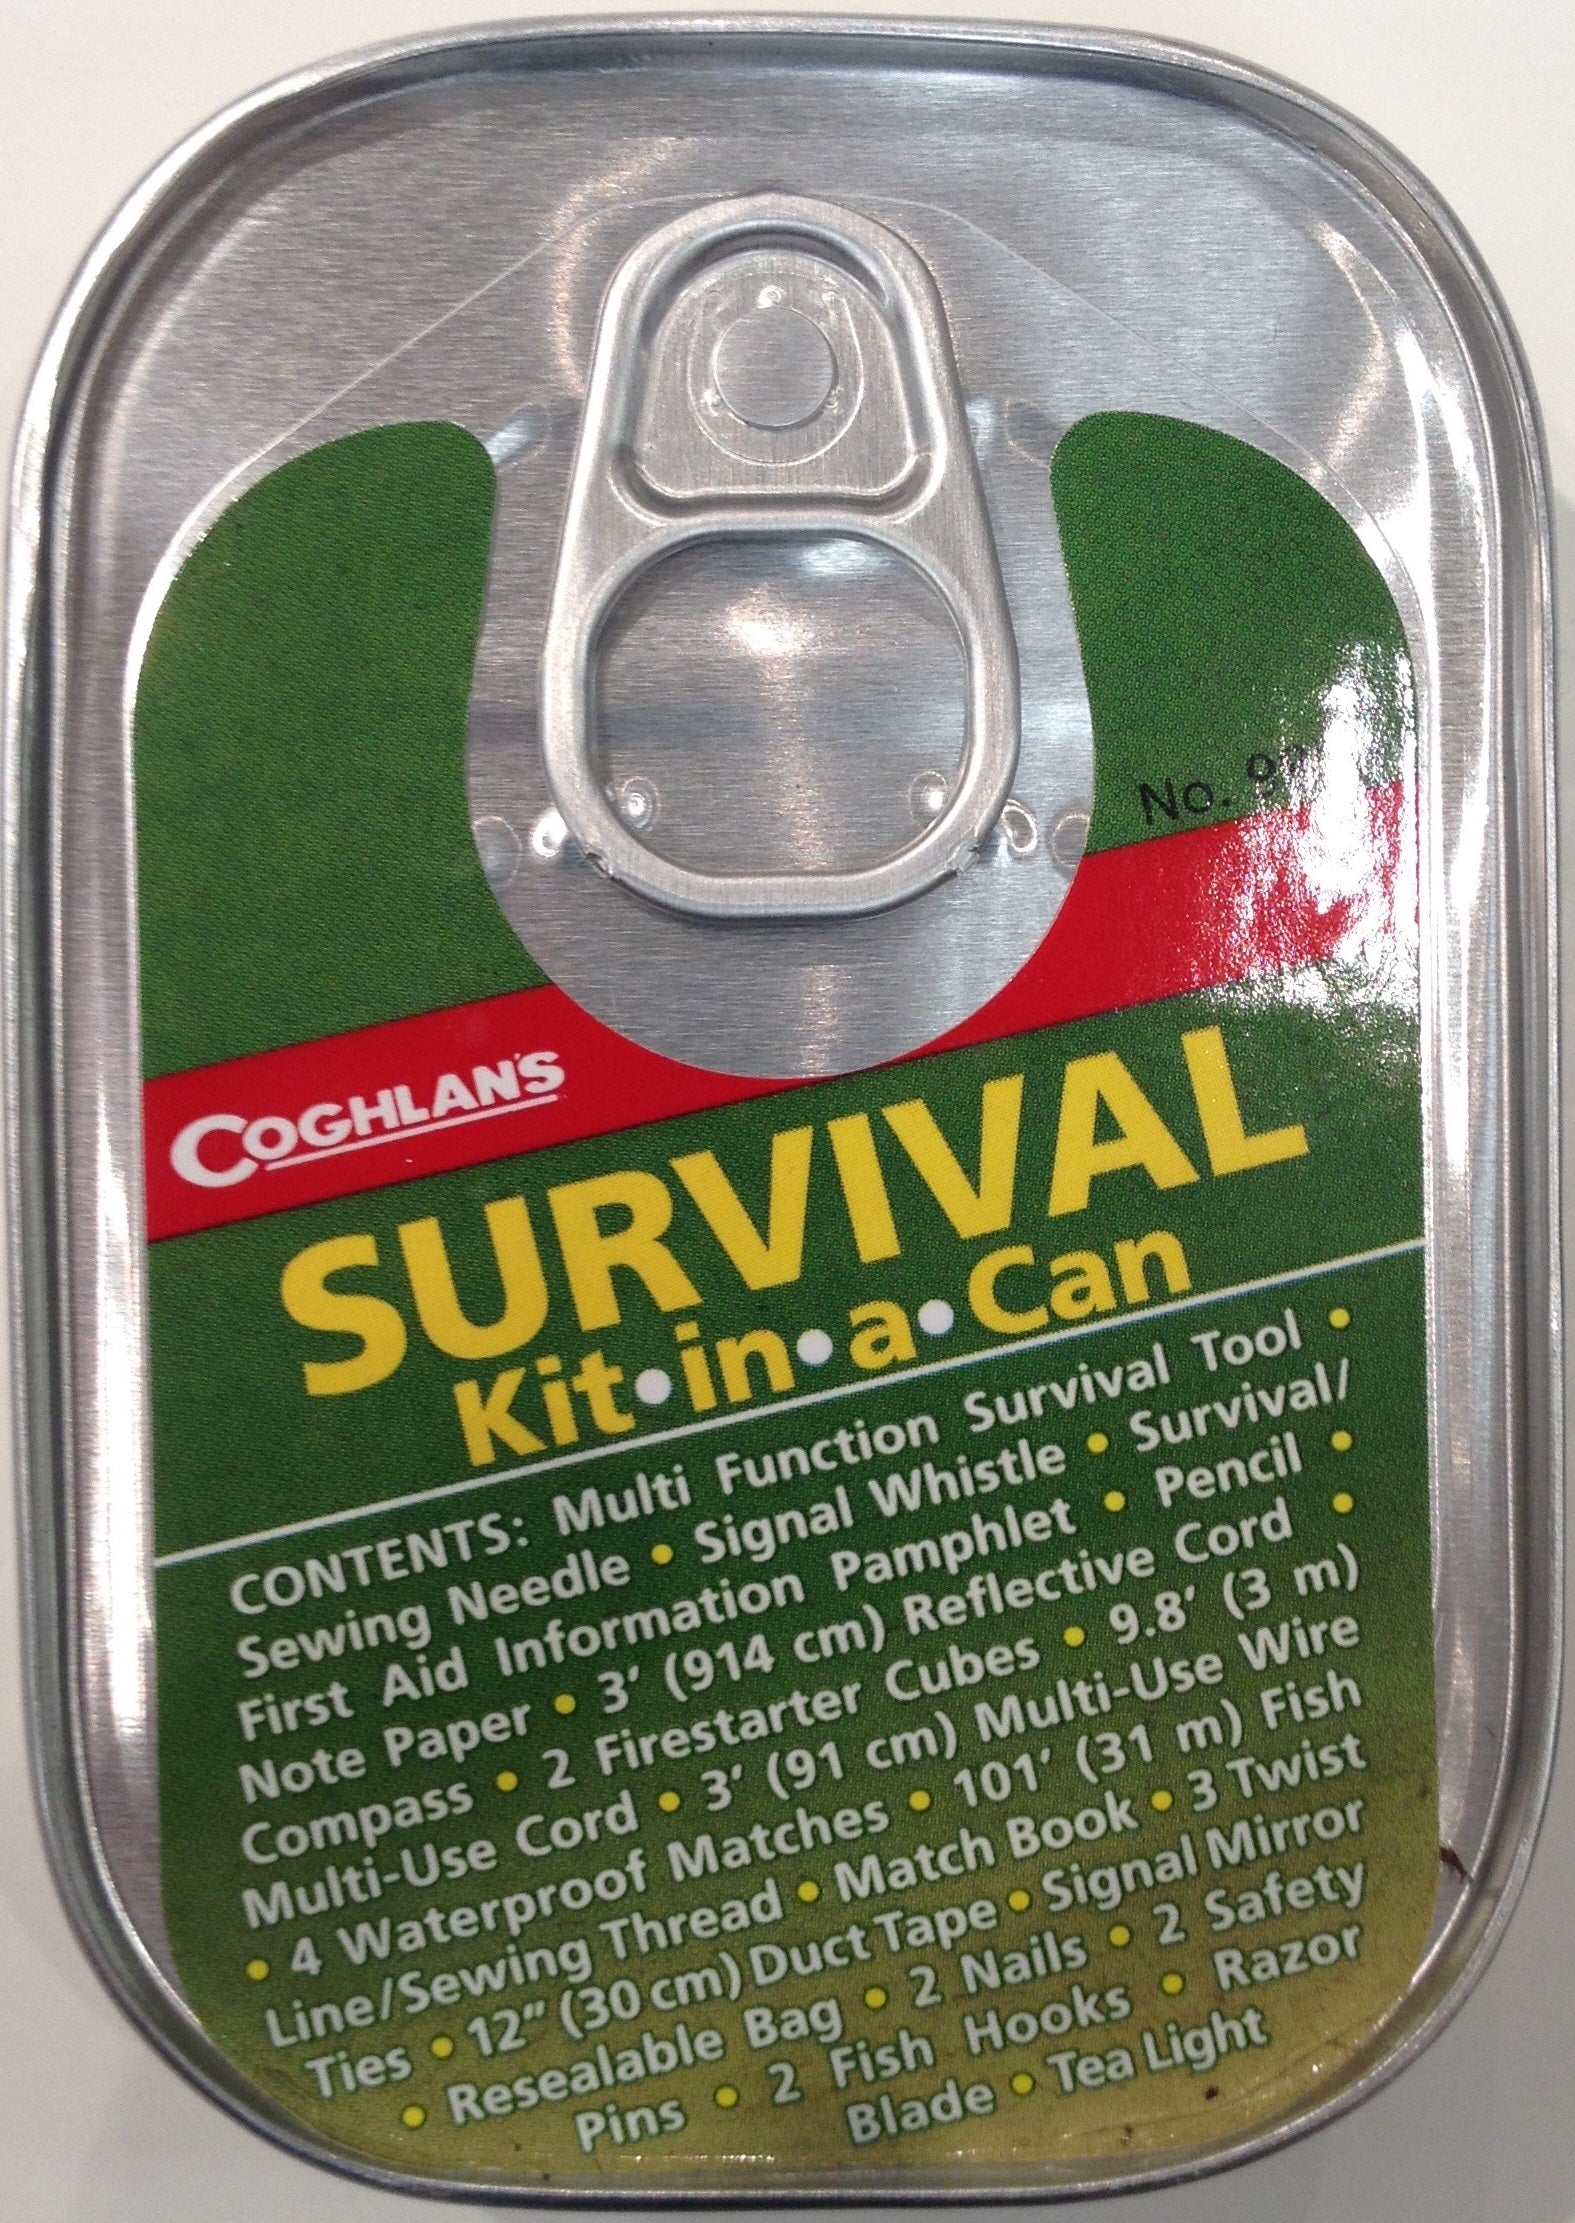 Survival Kit-In-A-Can